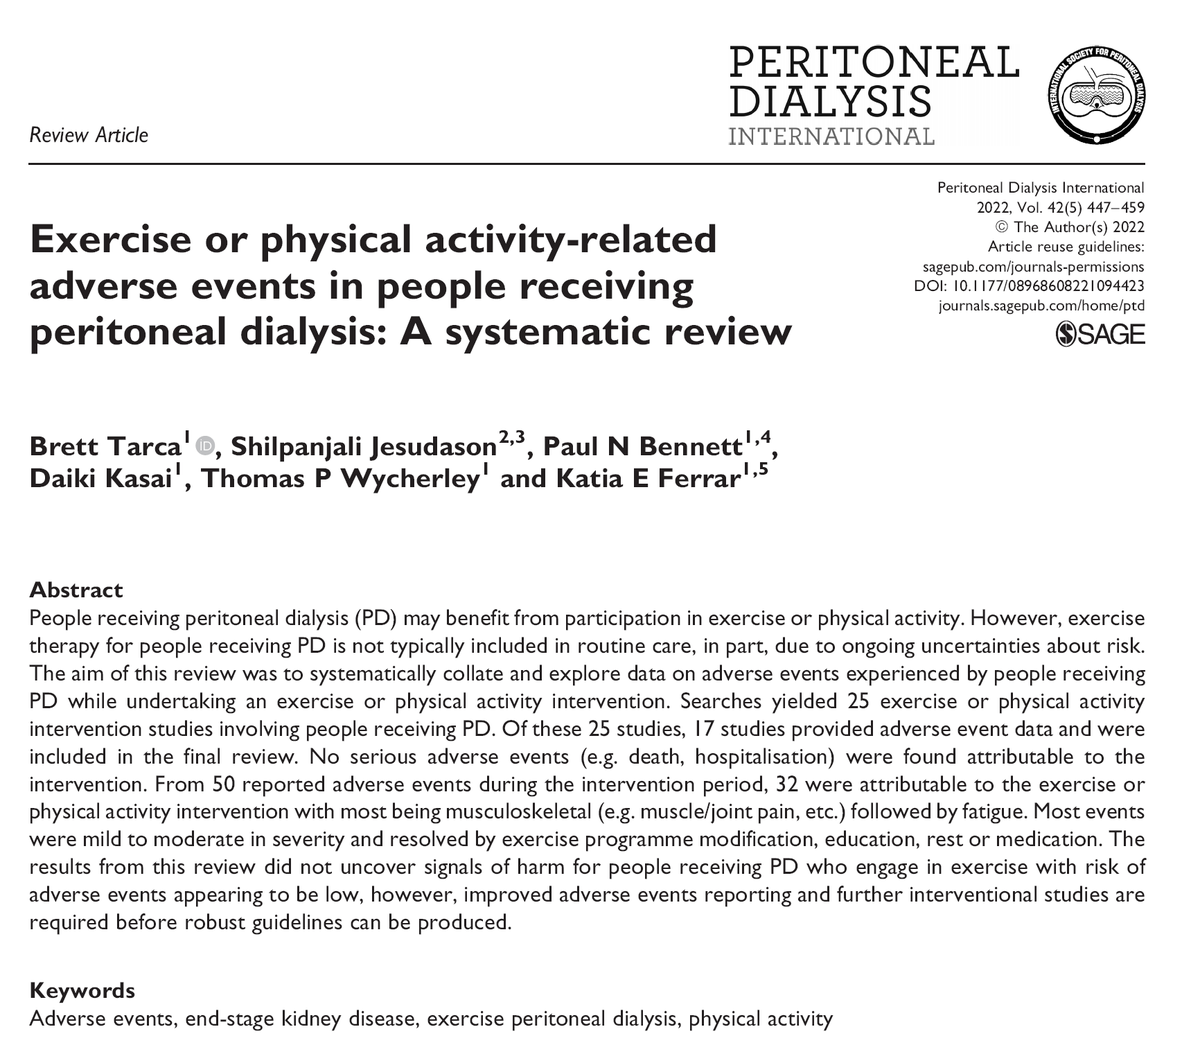 New Issue - September 2022 @PDI_Journal 📄: Exercise or physical activity-related adverse events in people receiving peritoneal dialysis: A systematic review ✍: Brett Tarca et al @BrettTarca 🔗 : ow.ly/86f350KPs5P #PeritonealDialysis #EditorsChoice @PD_Perls #OpenAccess